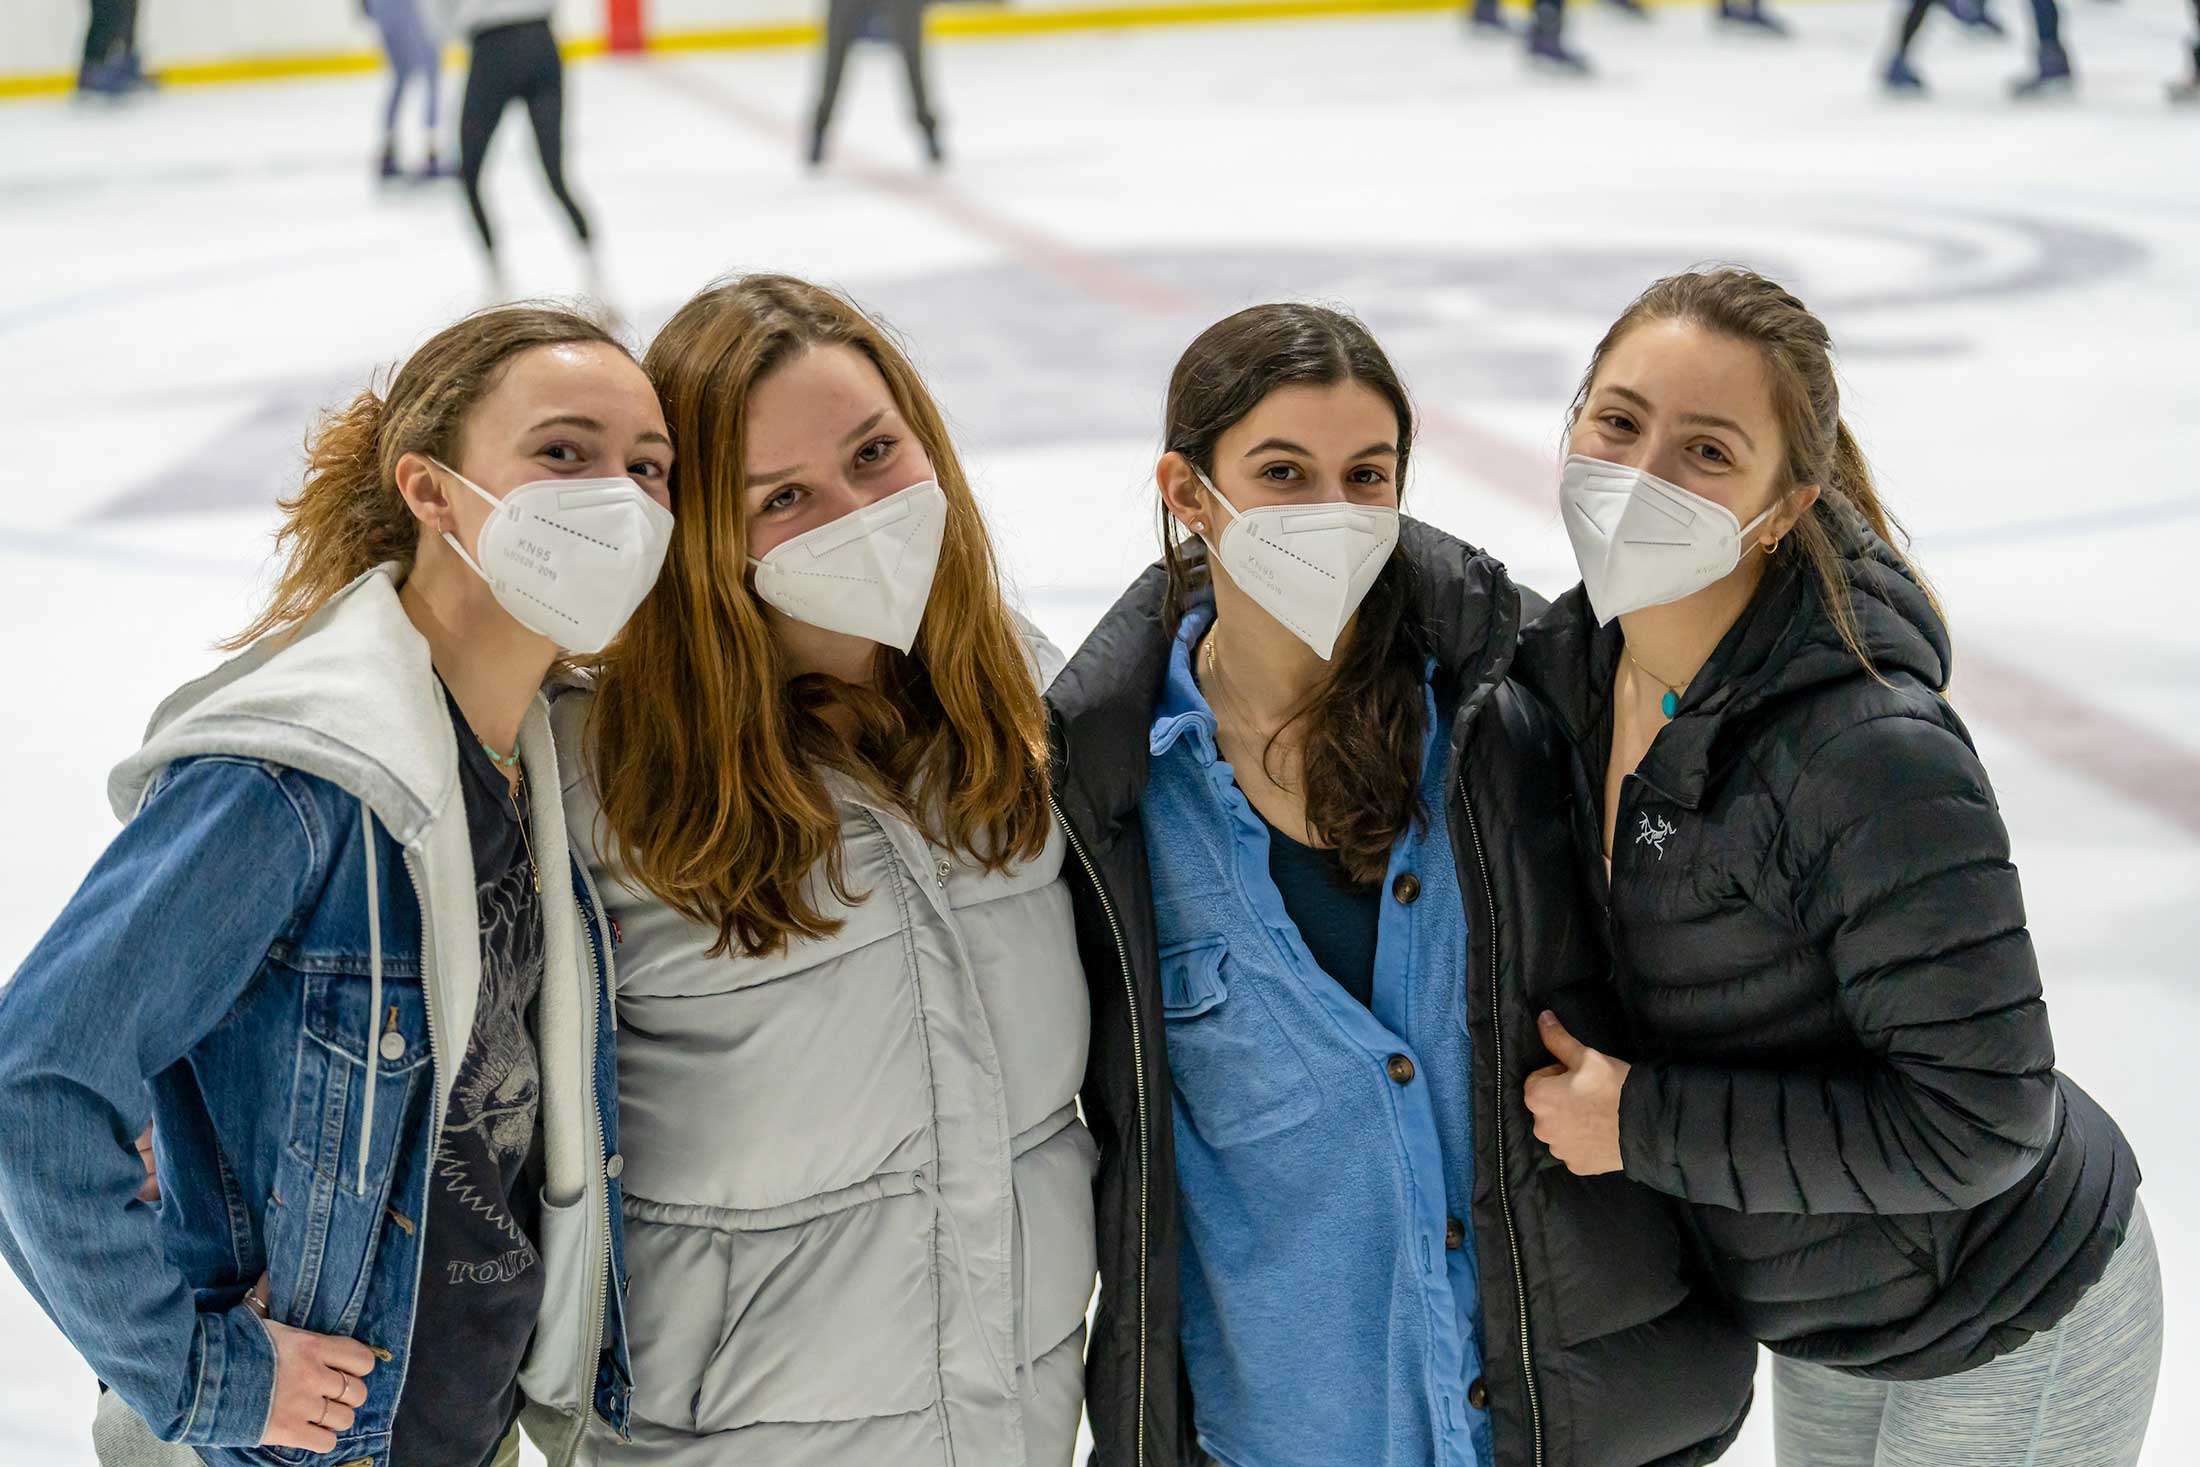 Four female students, all wearing face masks, stop to pose for a photo while ice skating.